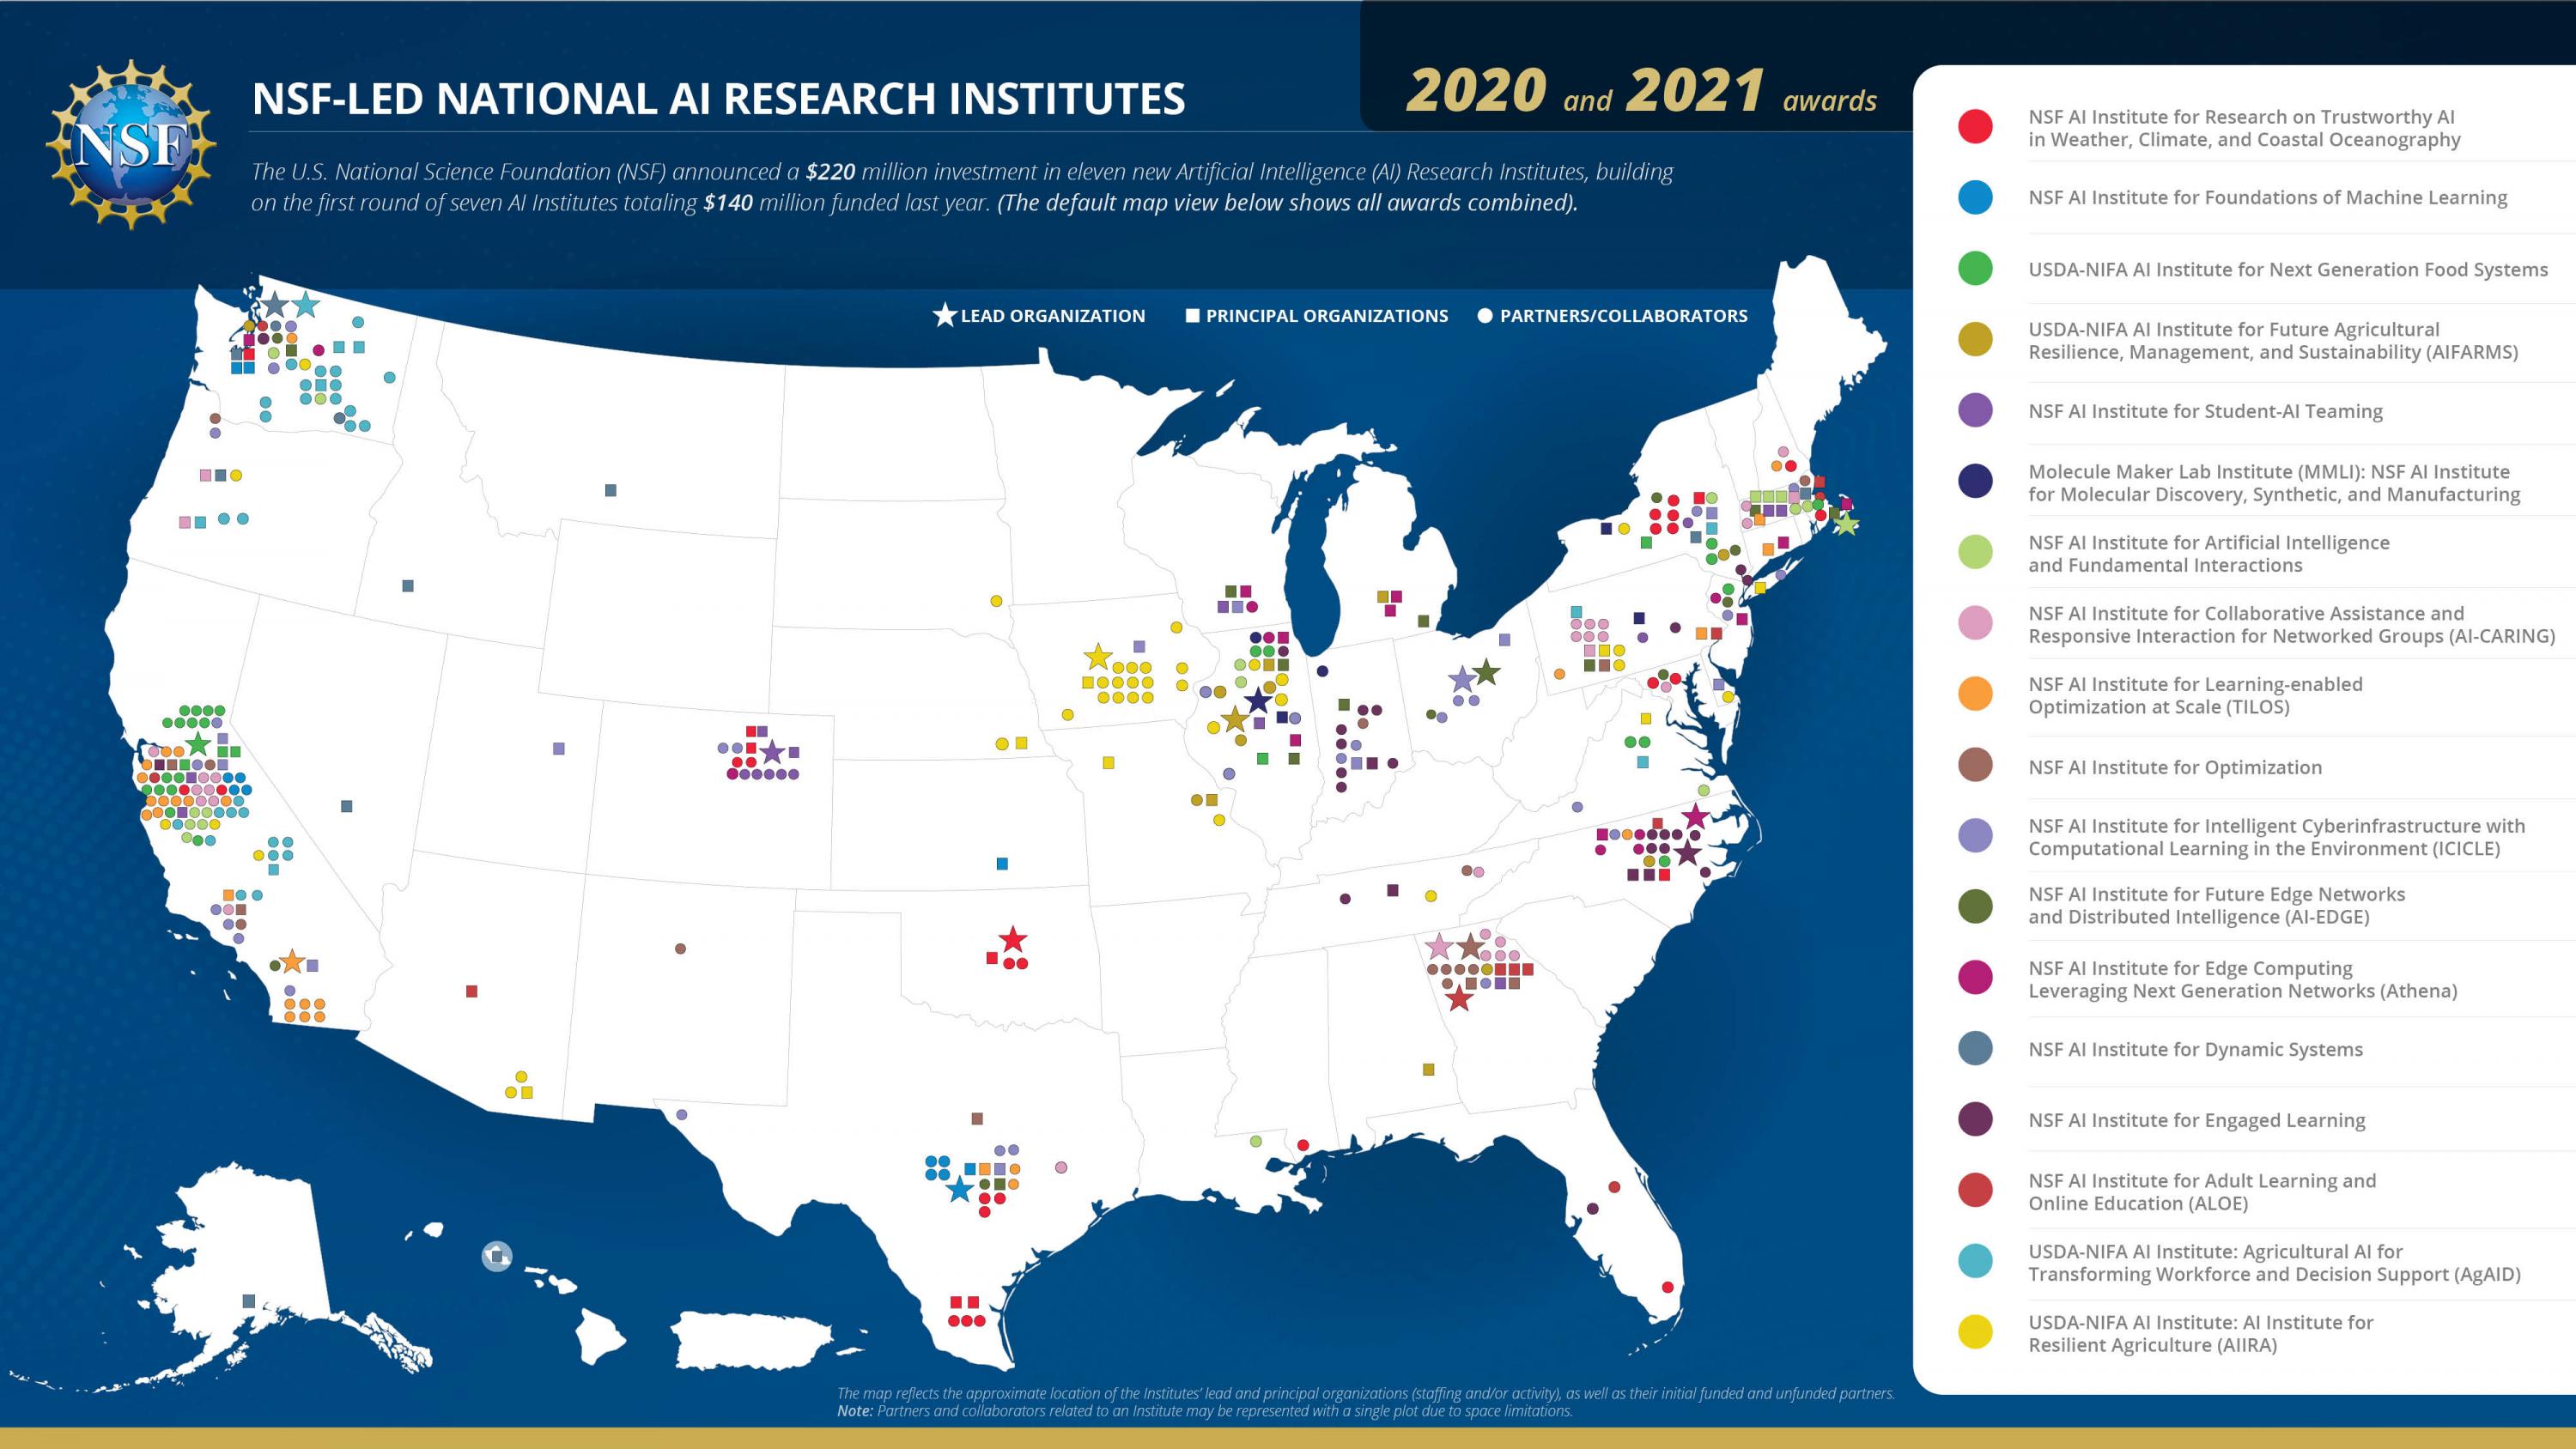 Description: Map of the United States reflecting the location of the Artificial Intelligence National Research Institutes led by the U.S. National Science Foundation, including lead and principal organizations, and funded and unfunded partners and collaborators.Credit: U.S. National Science Foundation.